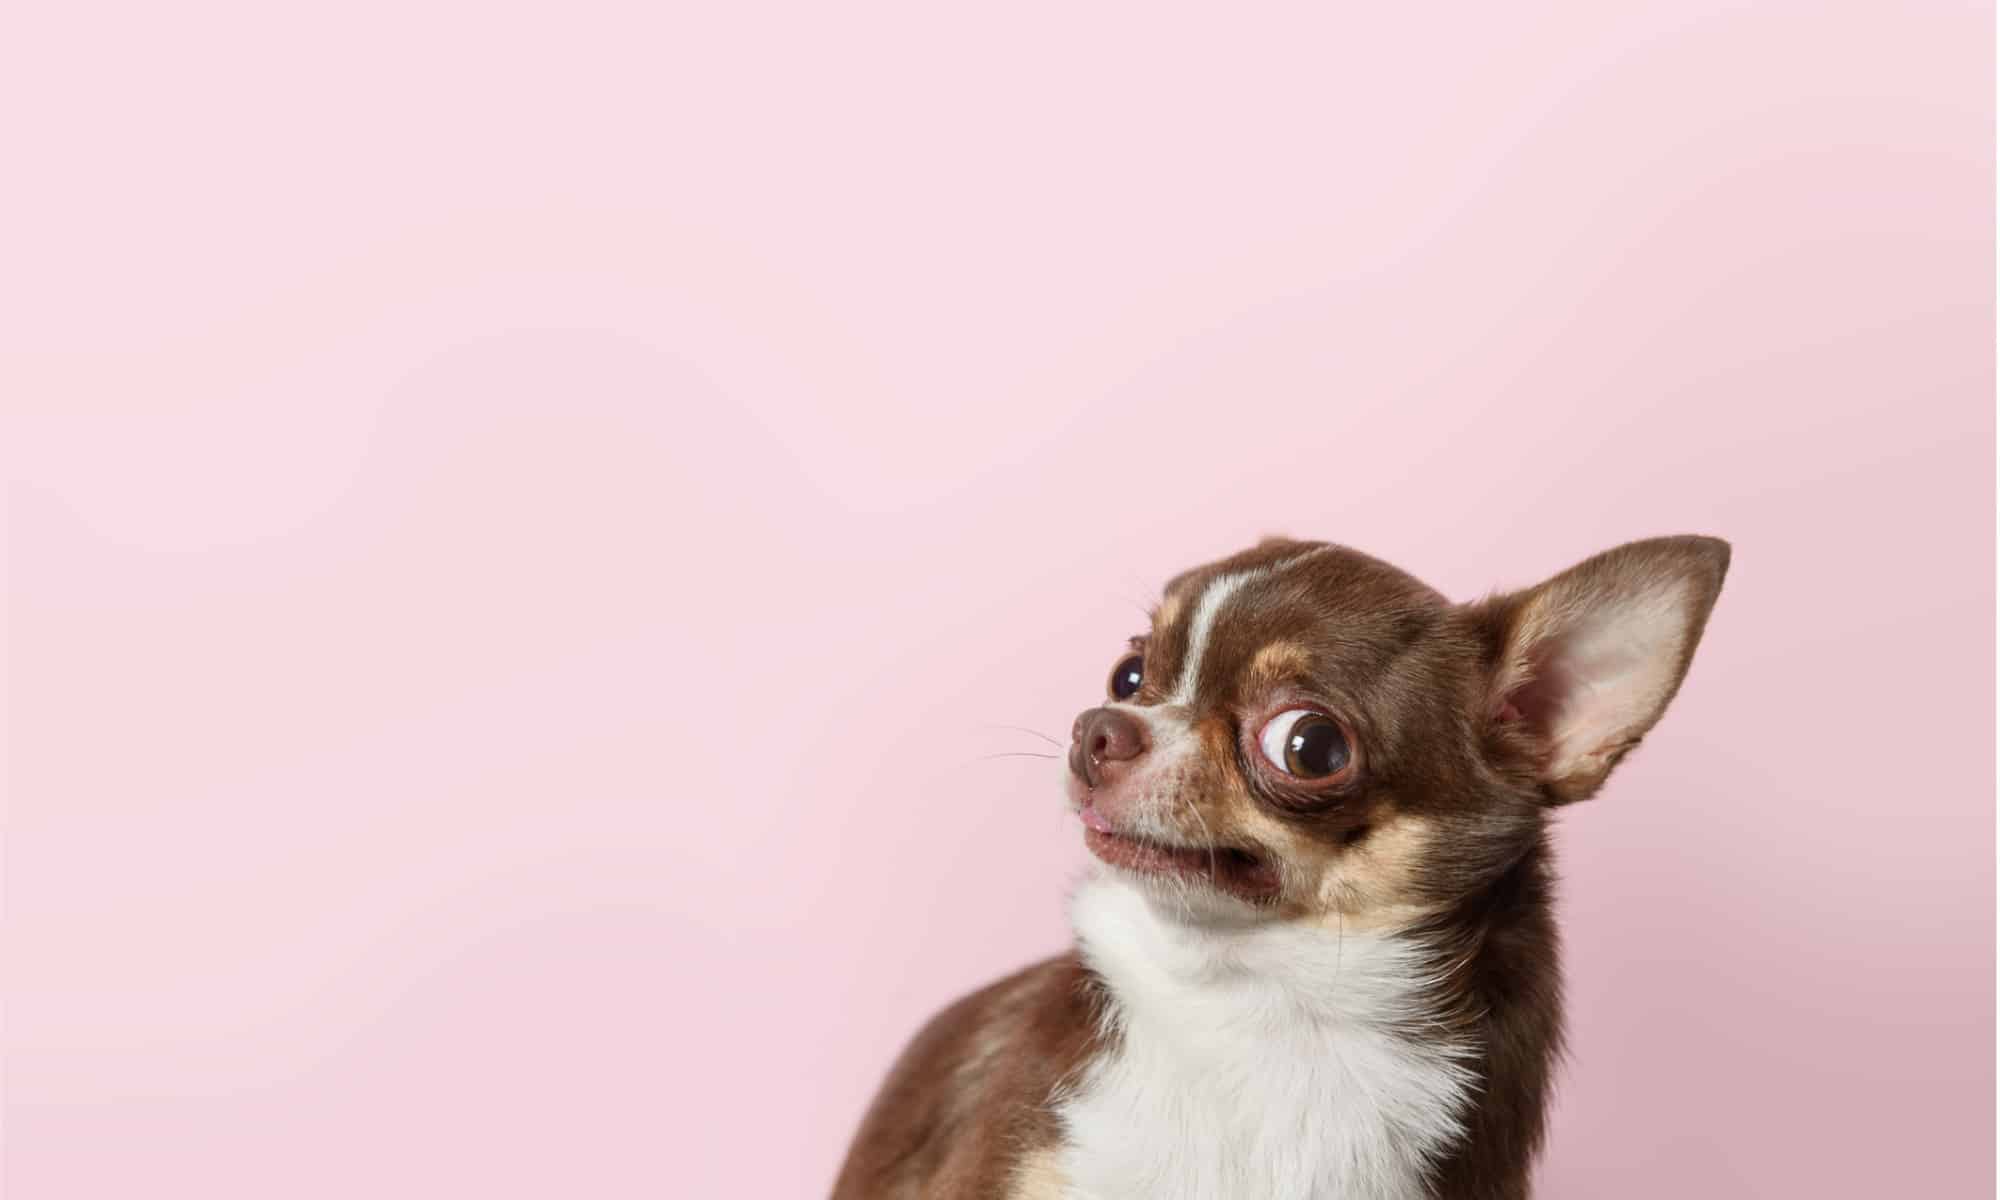 Chihuahua looks disgusted against pink background